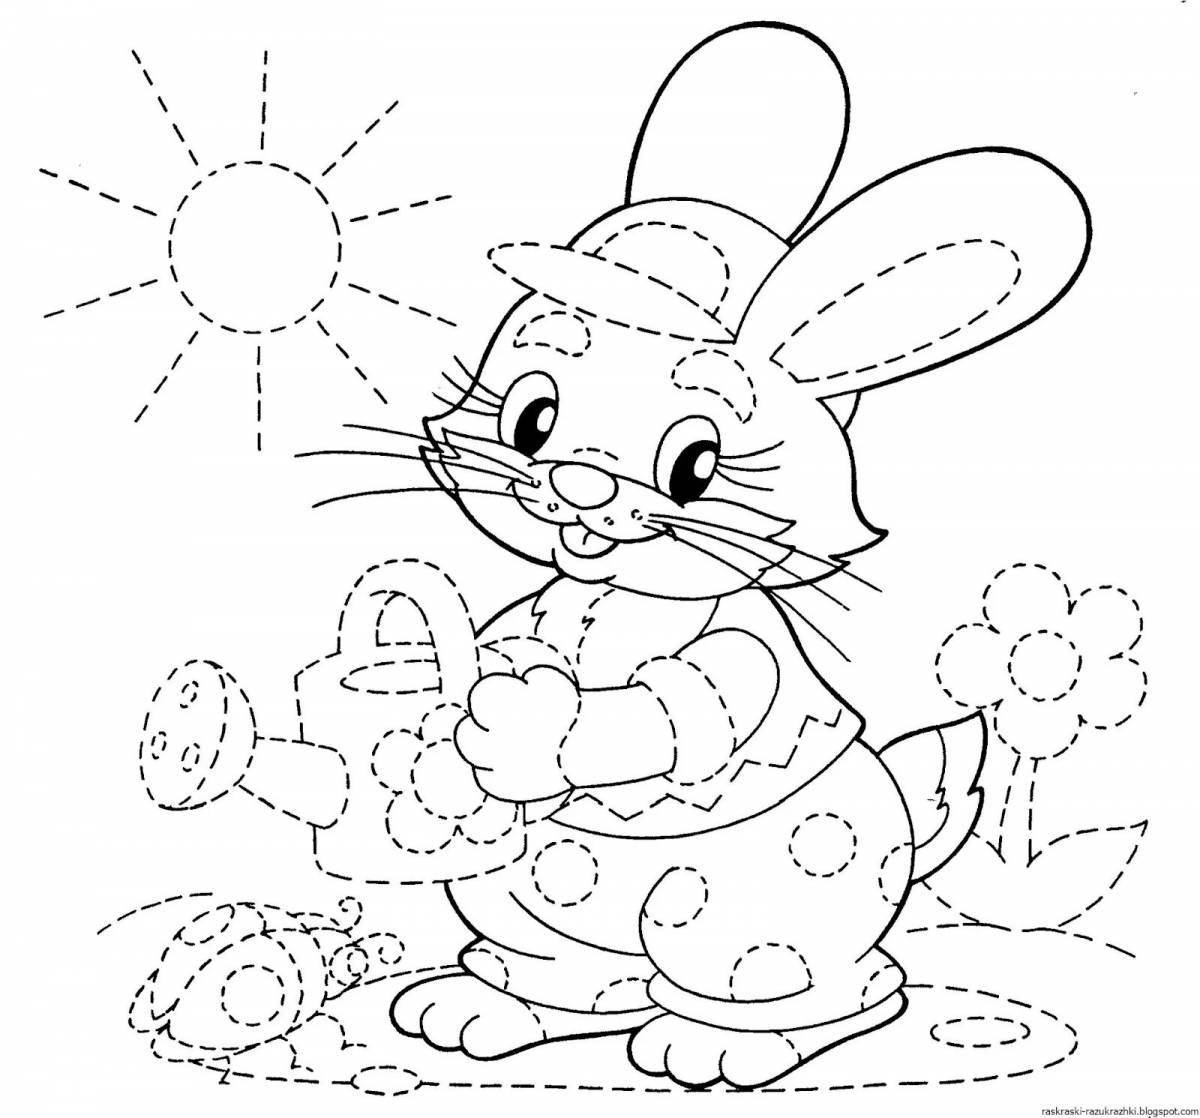 Color-frenzy coloring page for children 3-6 years old